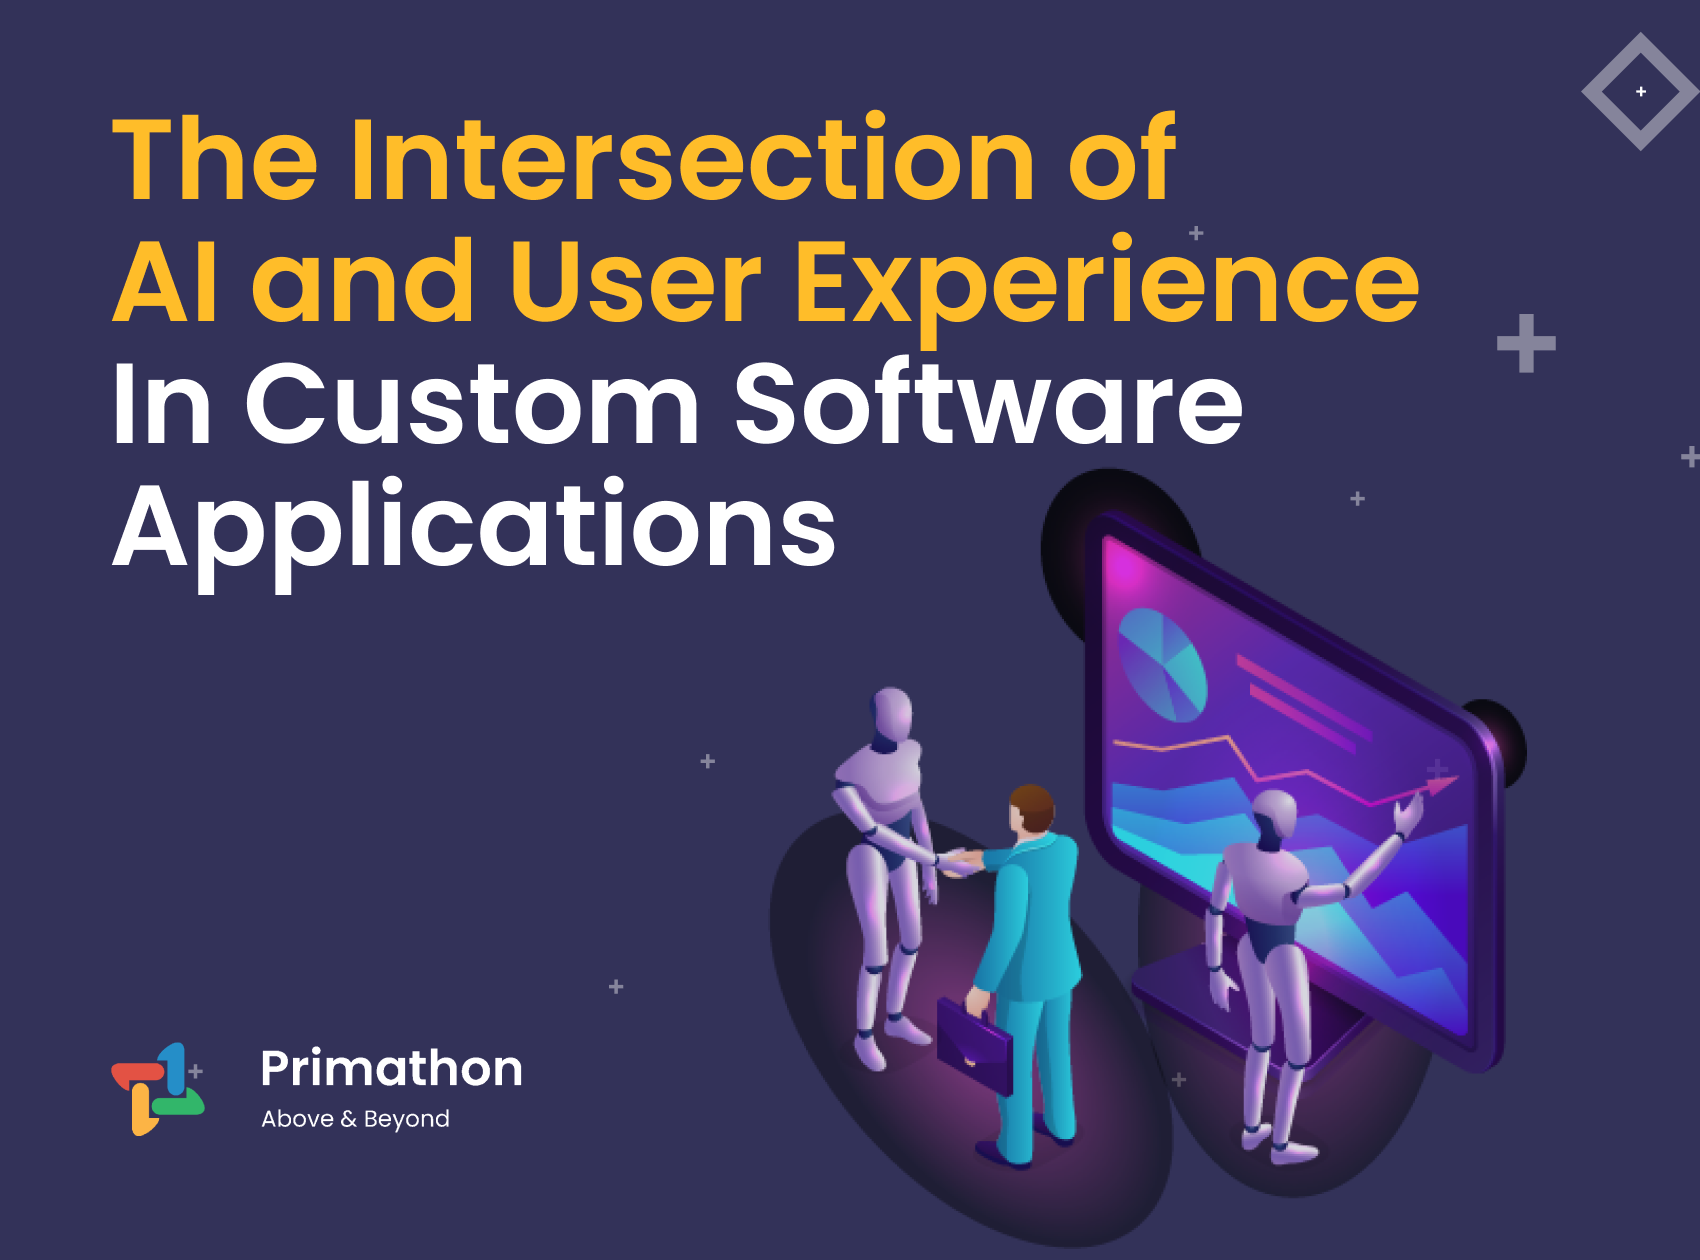 The Intersection of AI and User Experience in Custom Software Applications